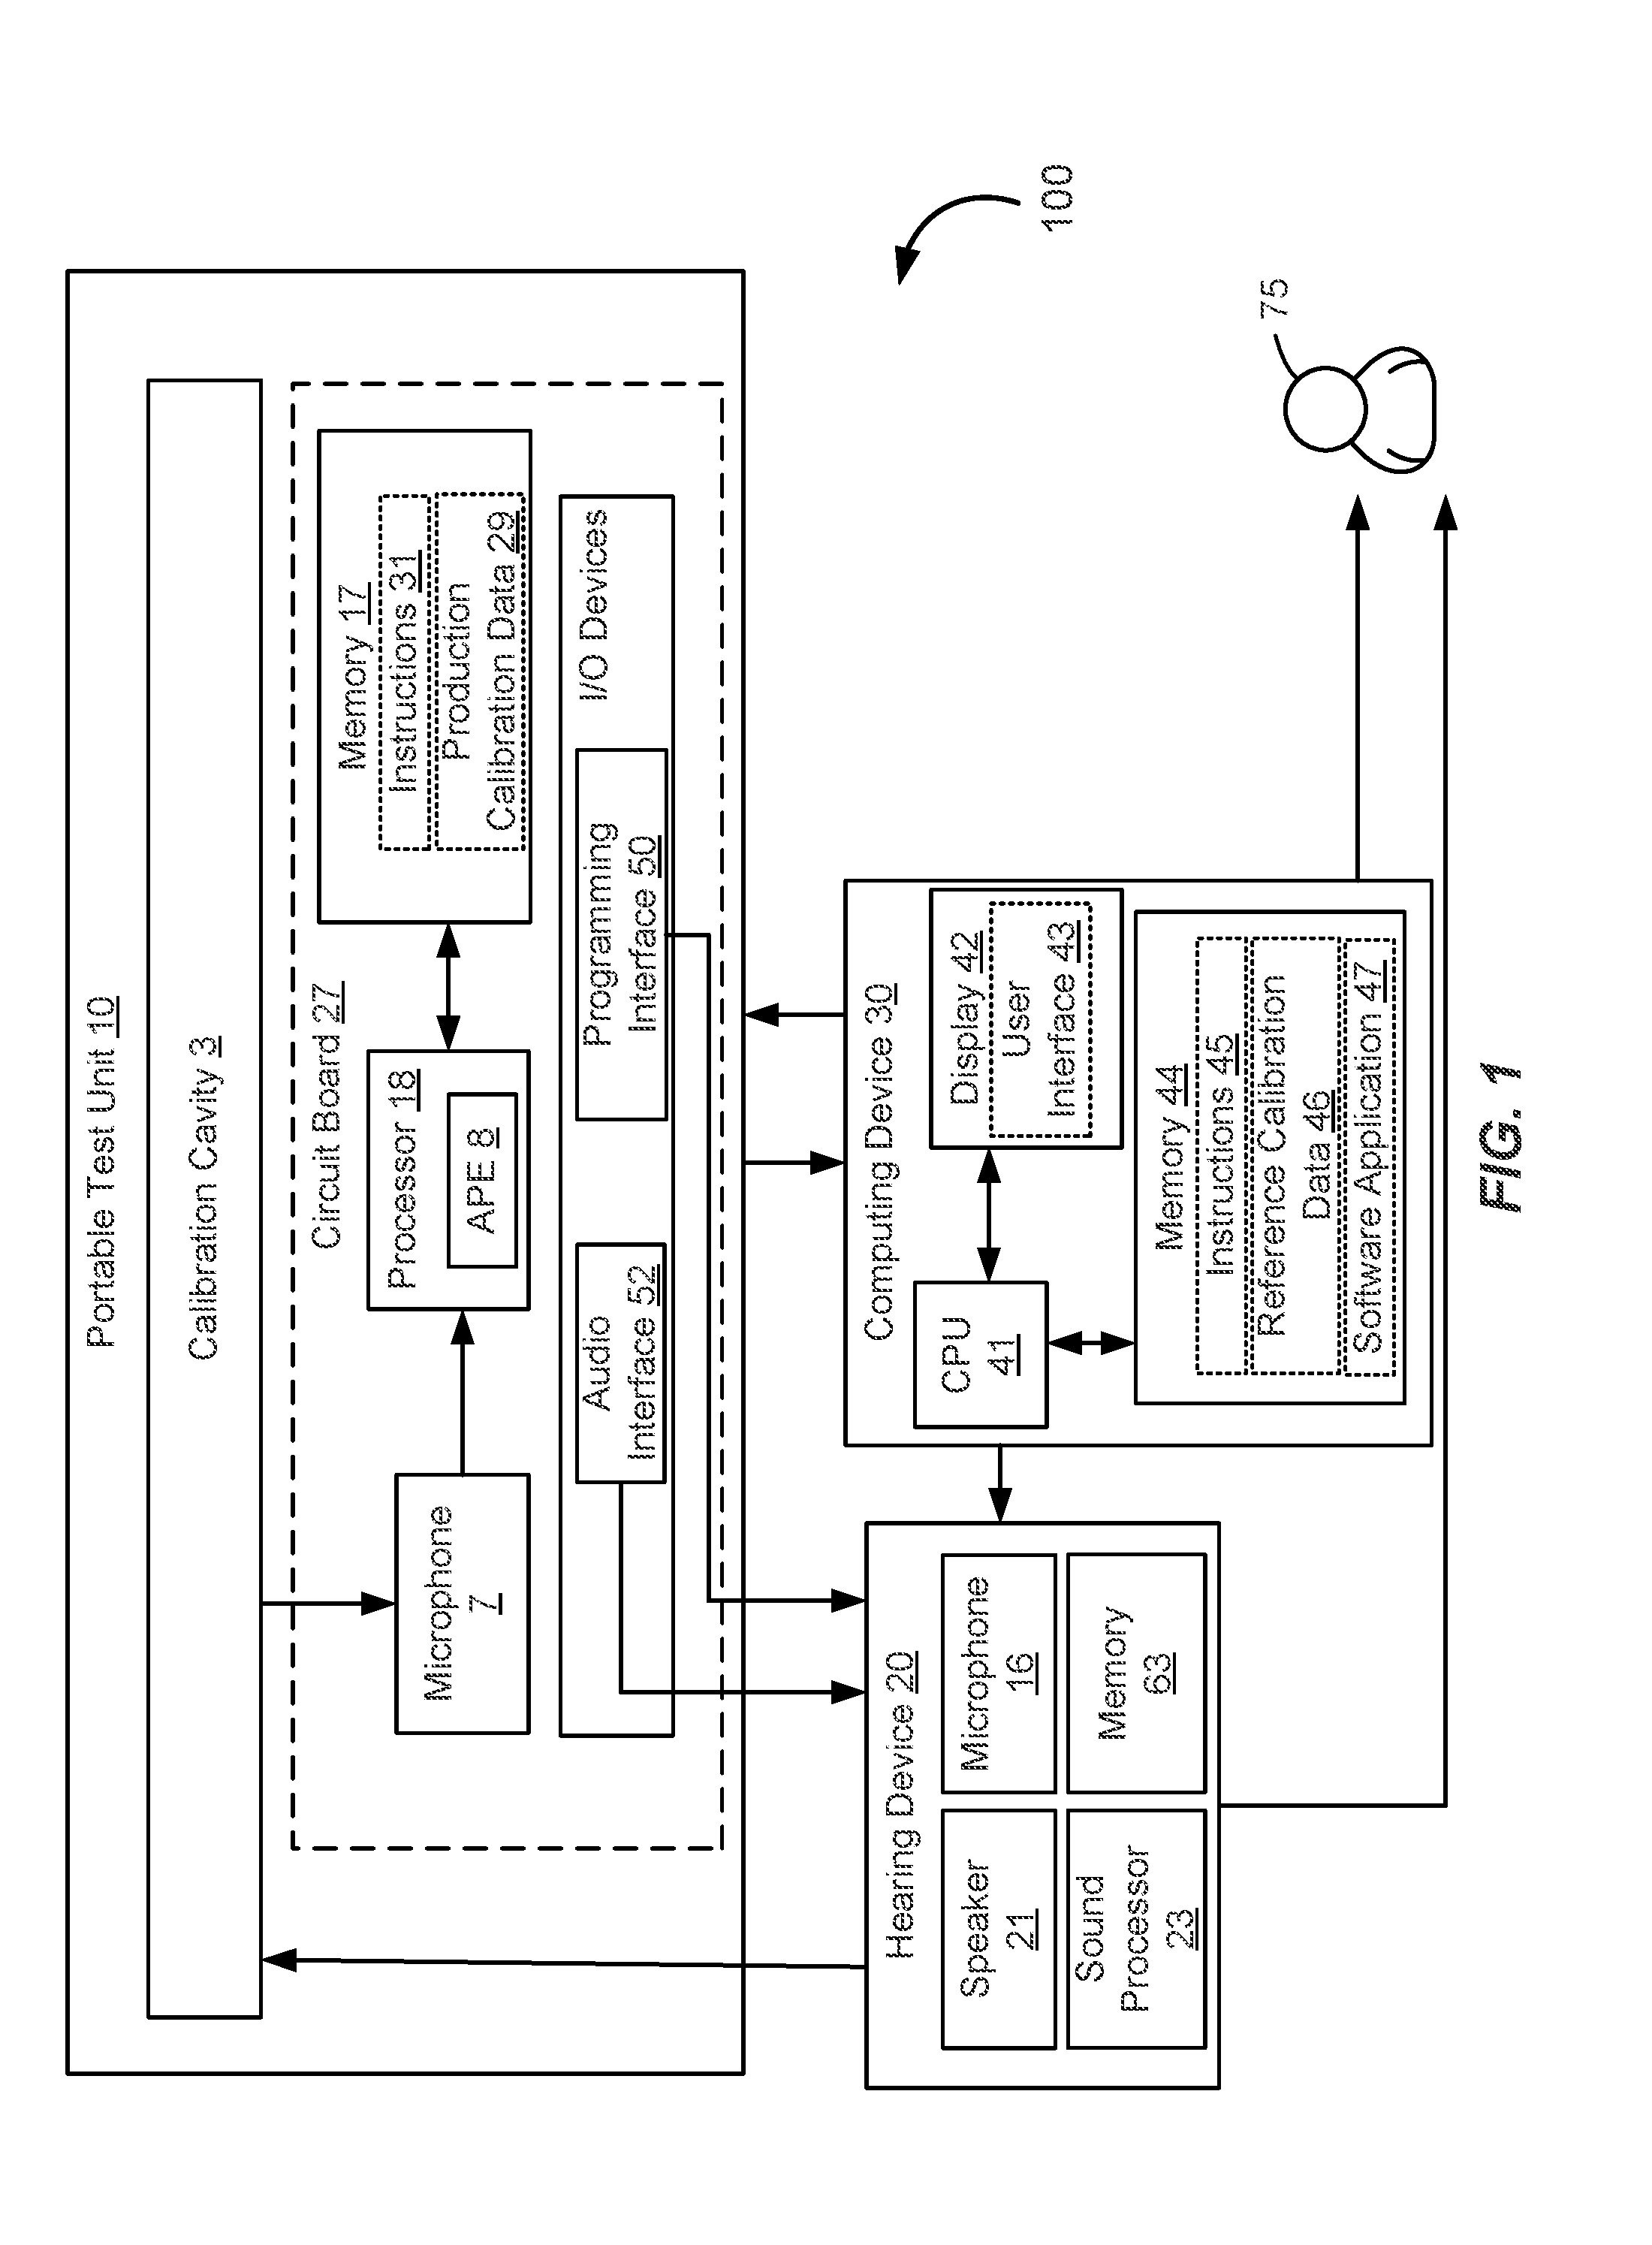 Hearing device test system for non-expert user at home and non-clinical settings